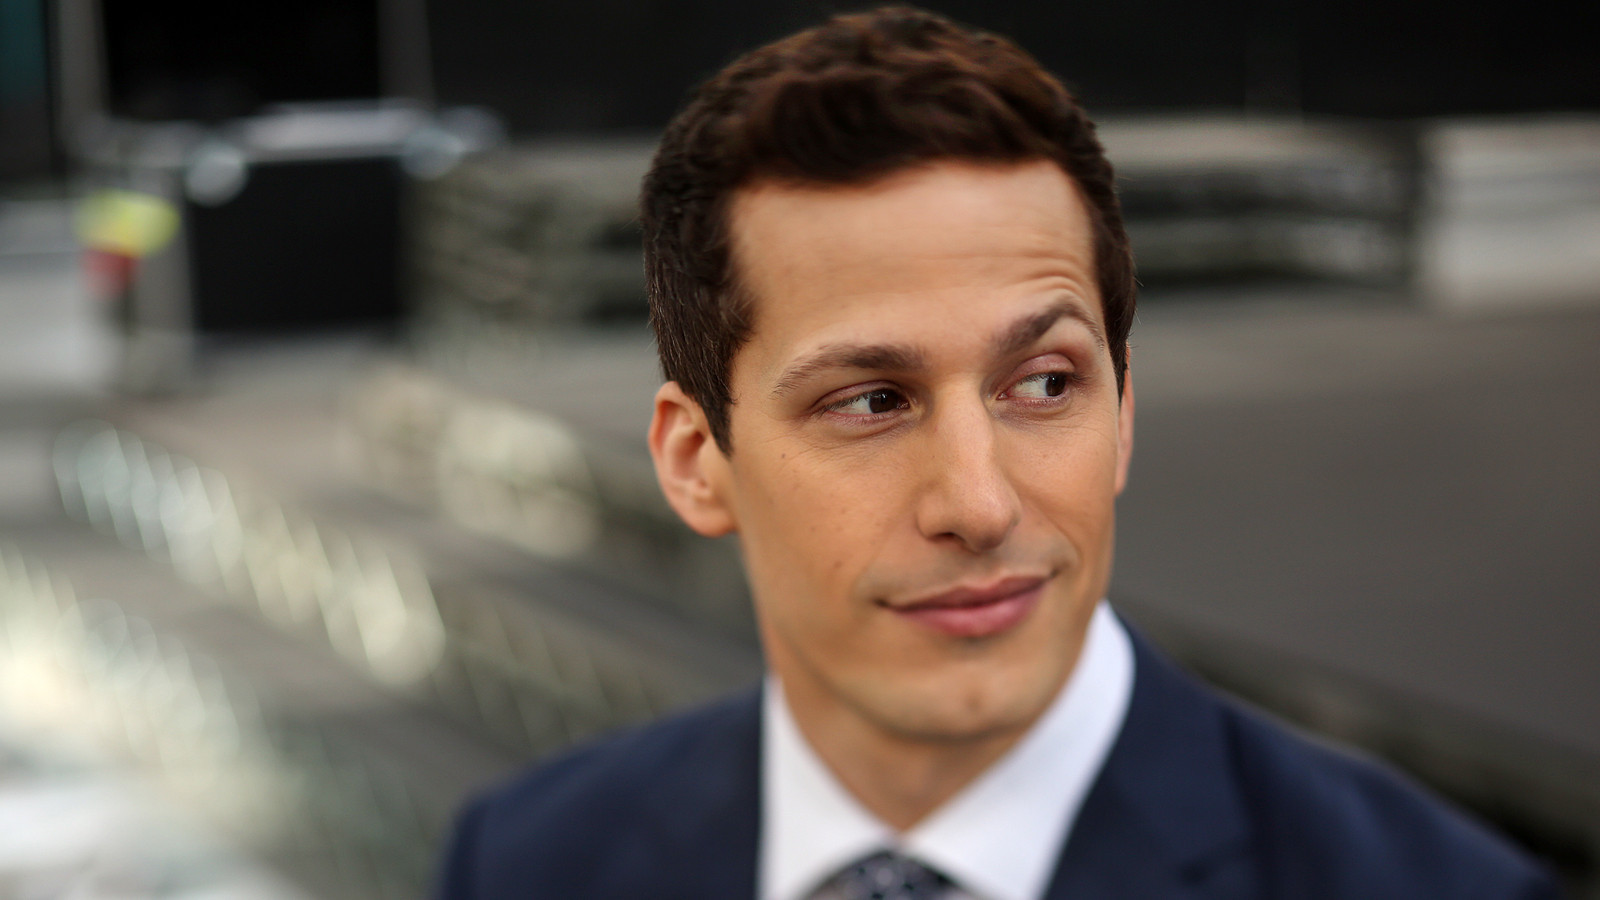 Amazing Andy Samberg Pictures & Backgrounds